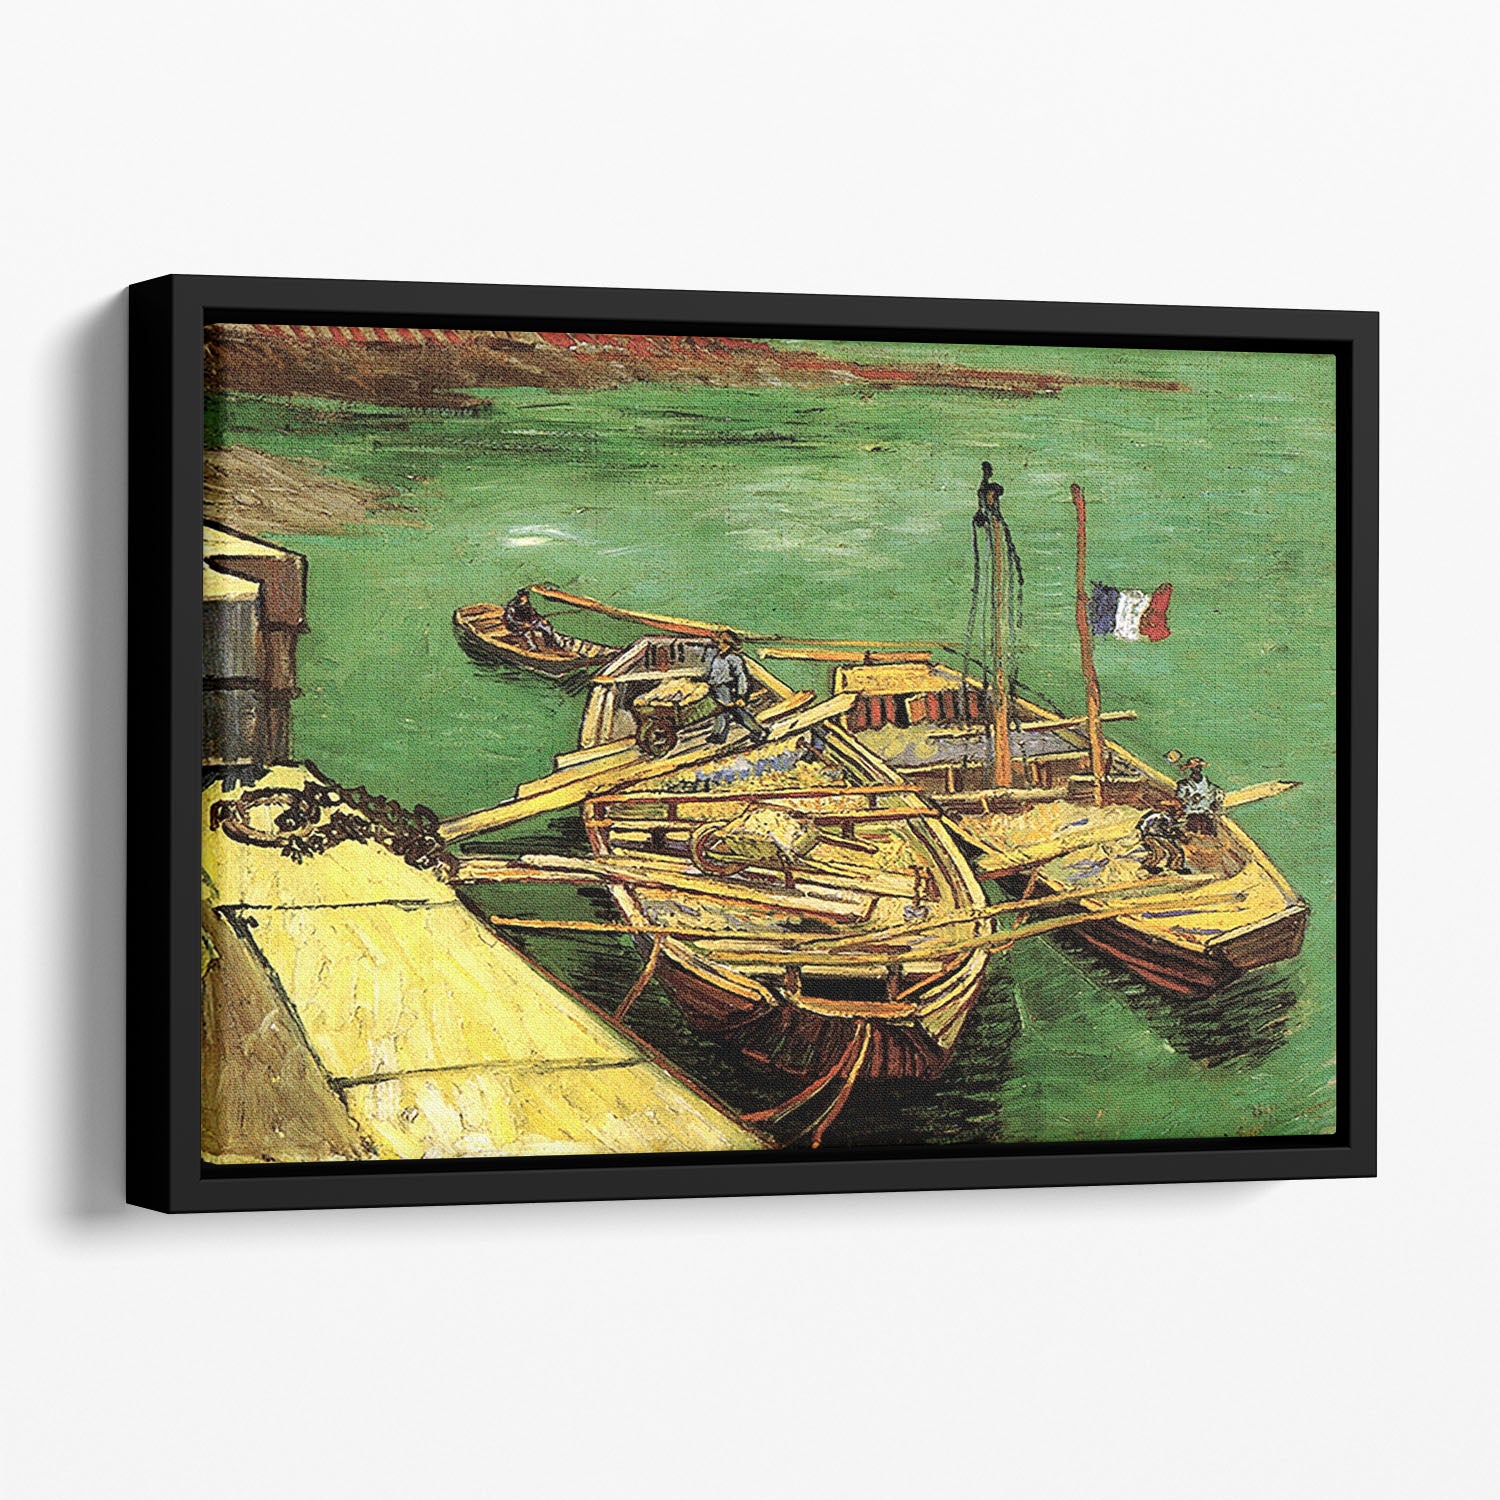 Quay with Men Unloading Sand Barges by Van Gogh Floating Framed Canvas